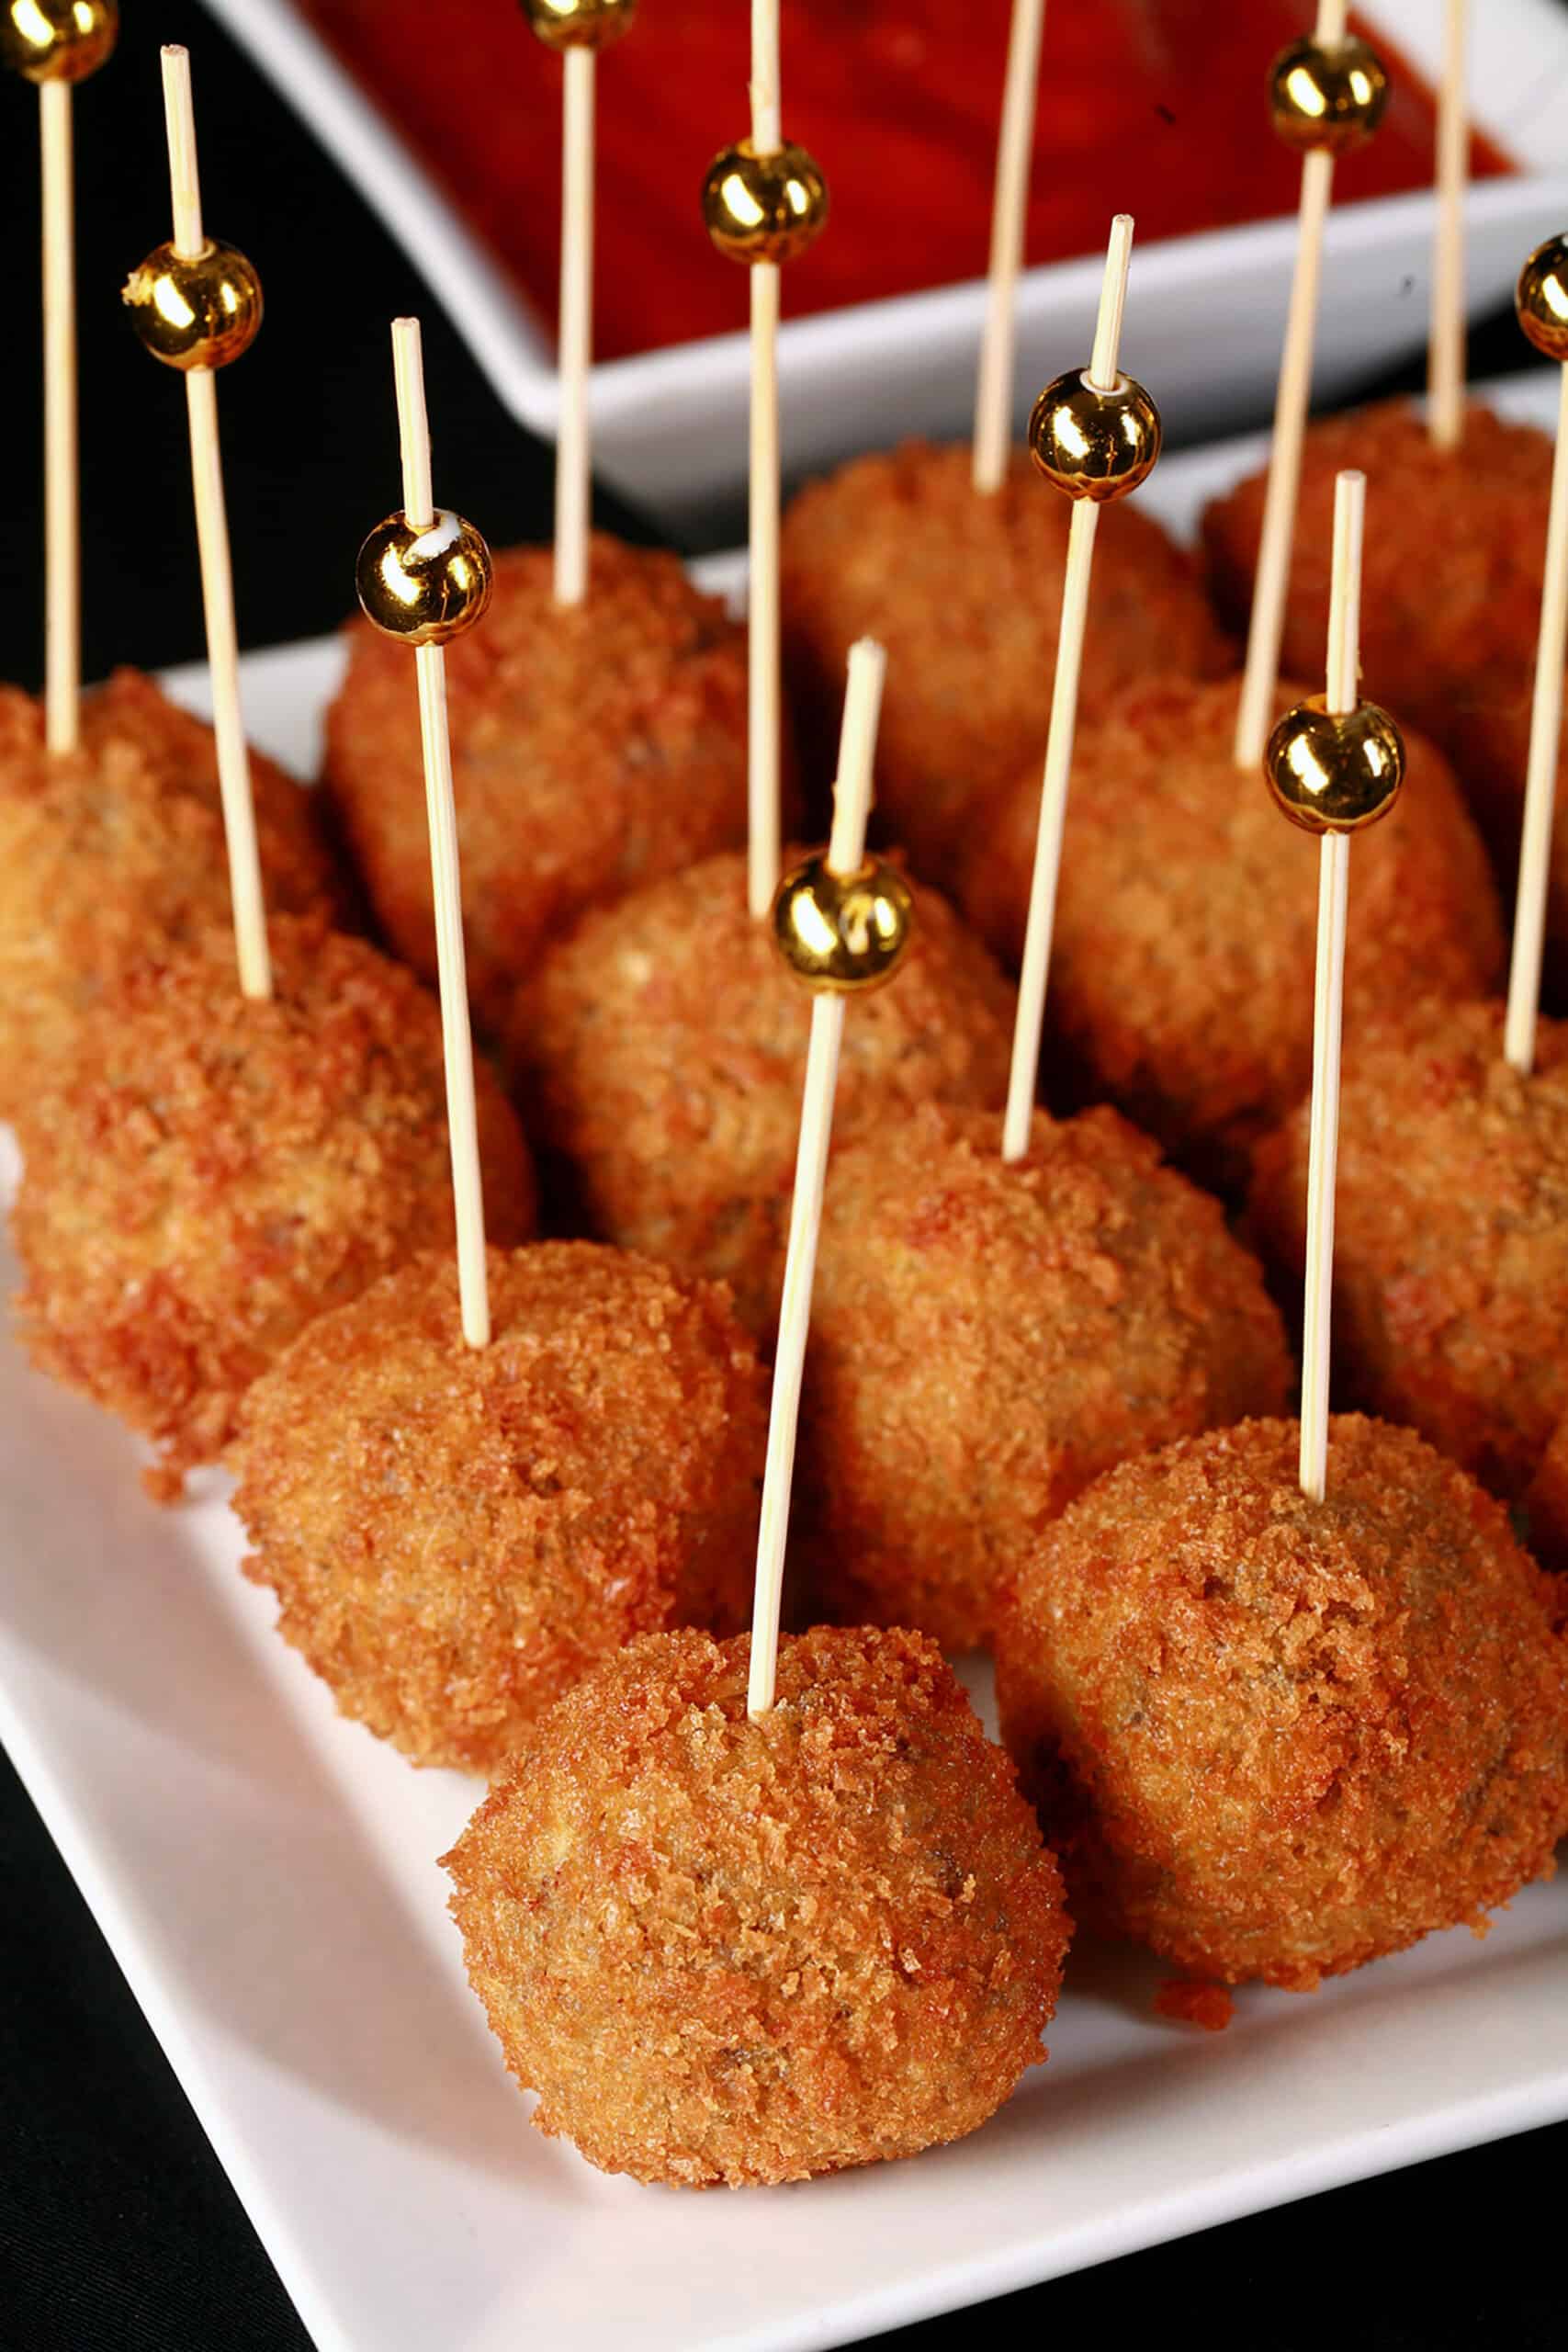 16 mini mushroom risotto balls on a plate, each with a tall toothpick topped with a gold ball.   There is a small bowl of marinara behind the plate.